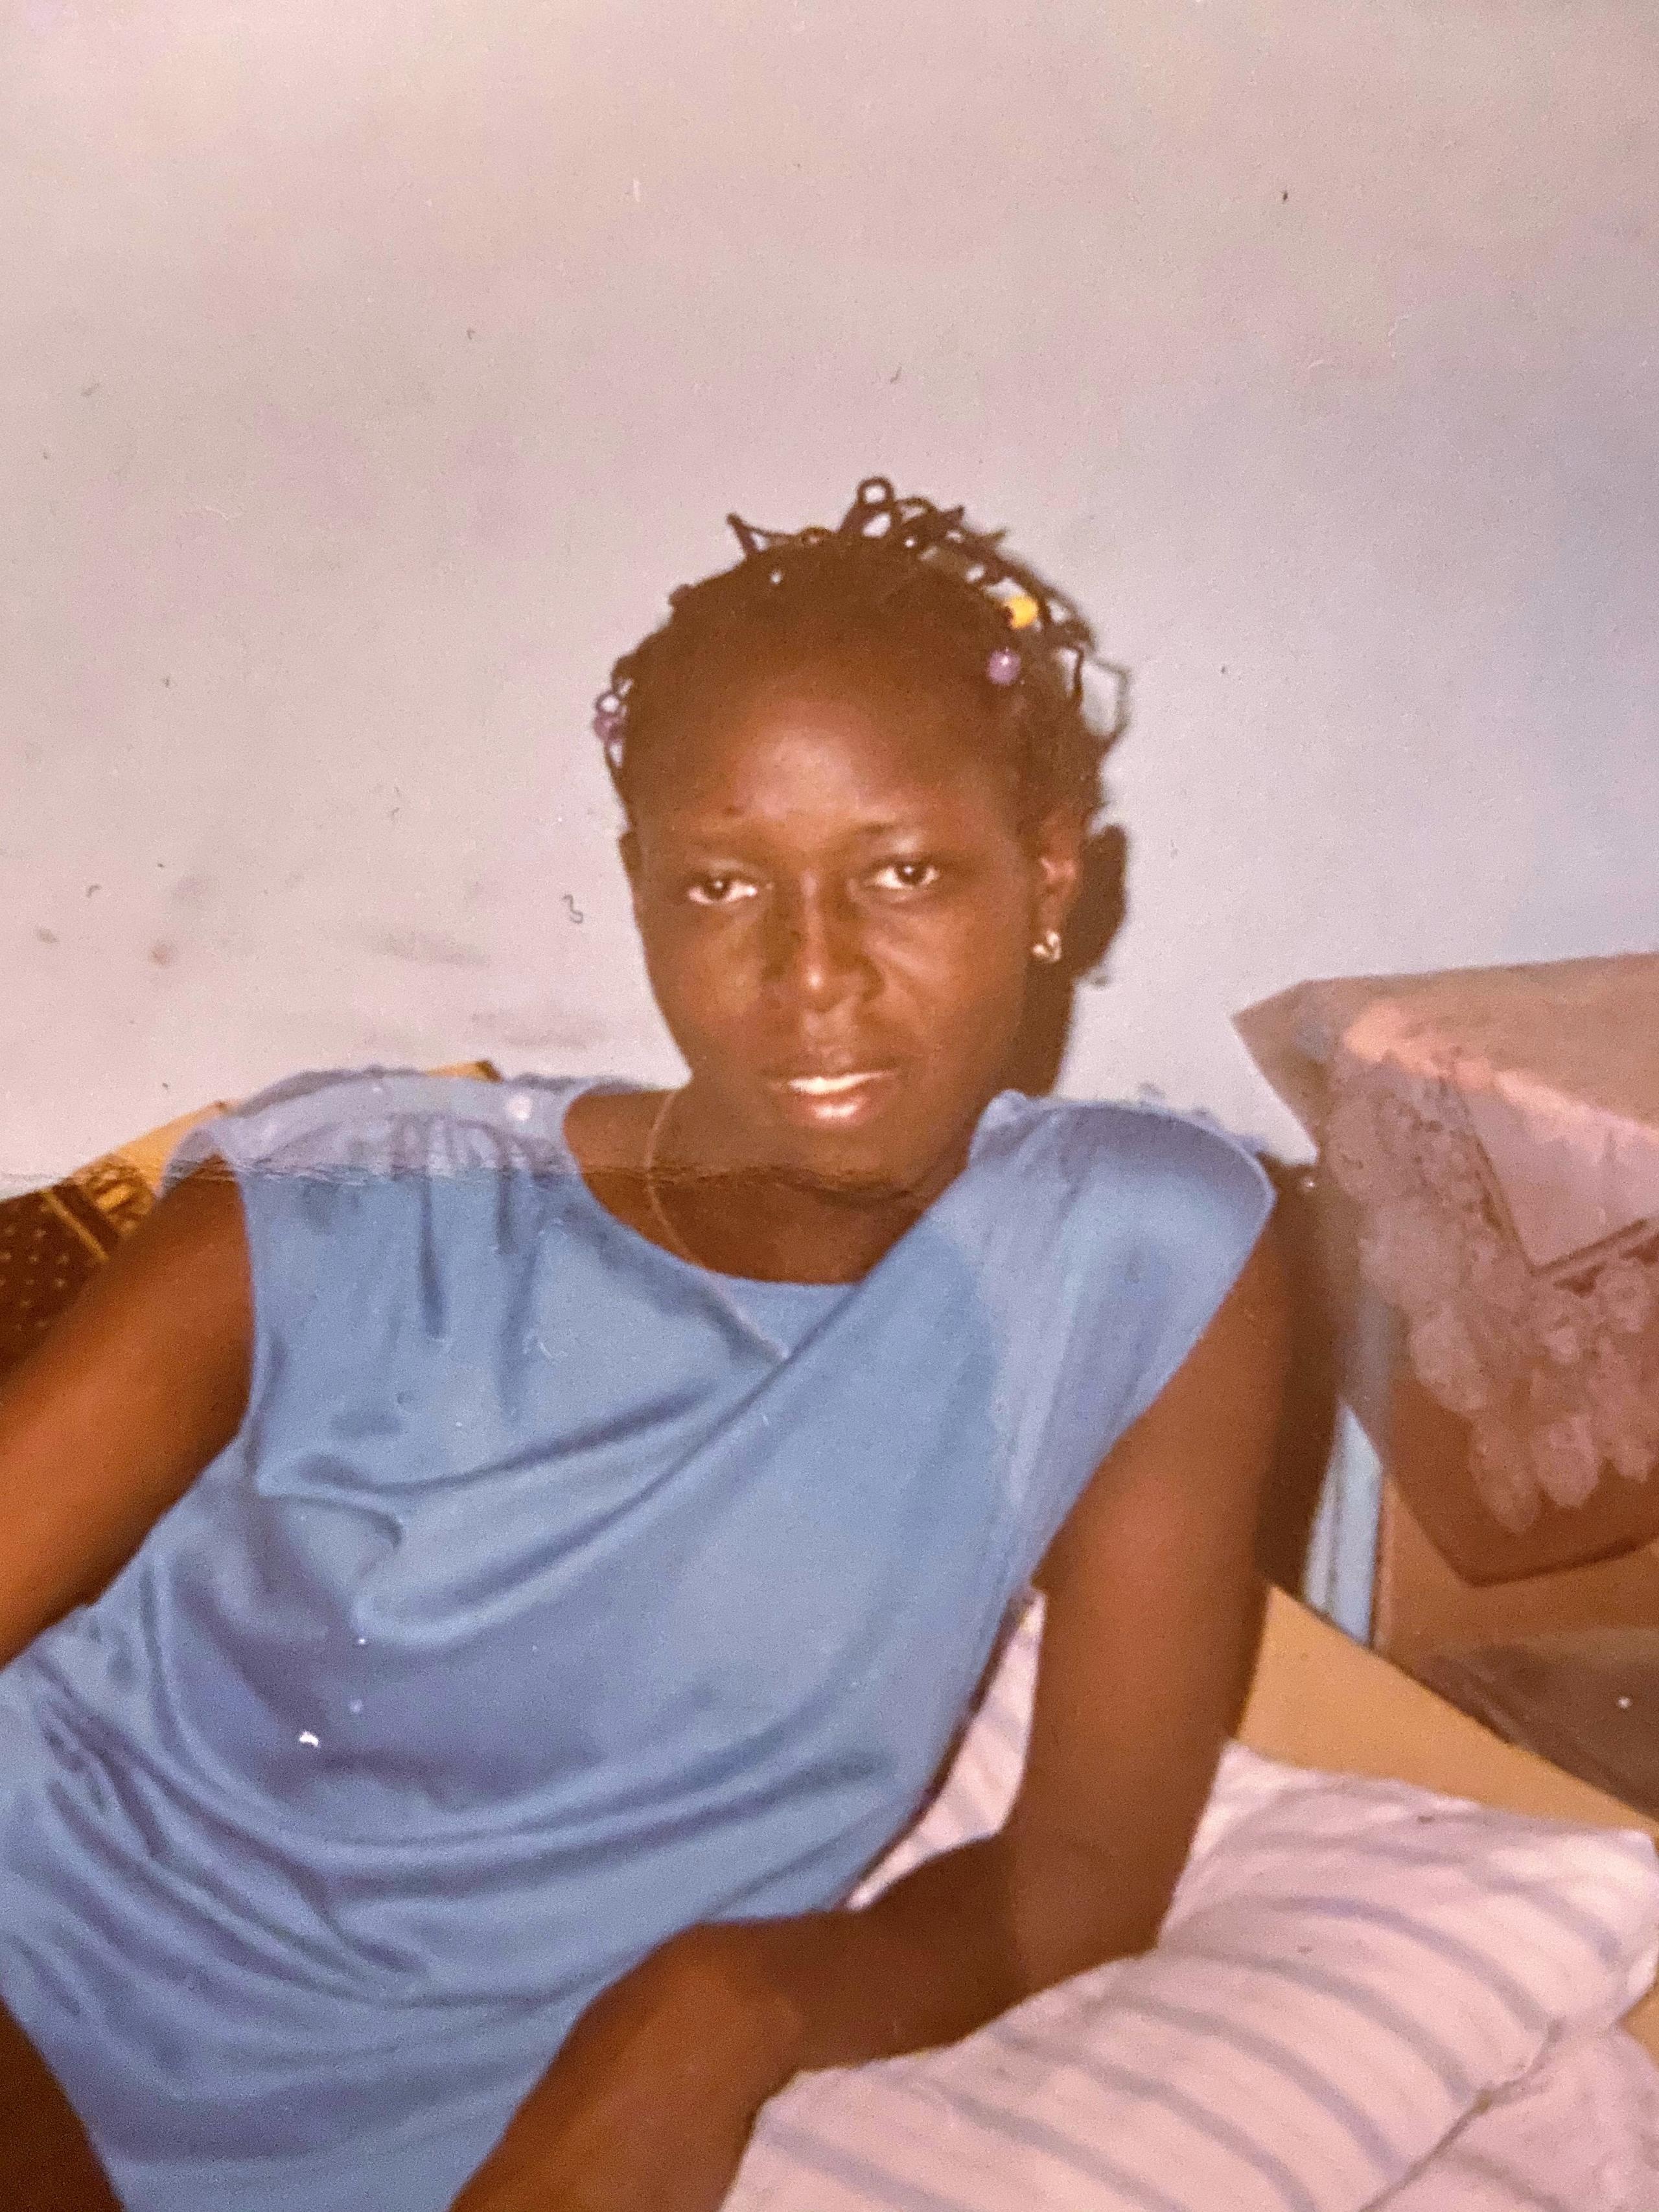 Helen came to Norway at the age of 22. This photo was taken a few years before she left her home country in South Sudan. (Photo: private)